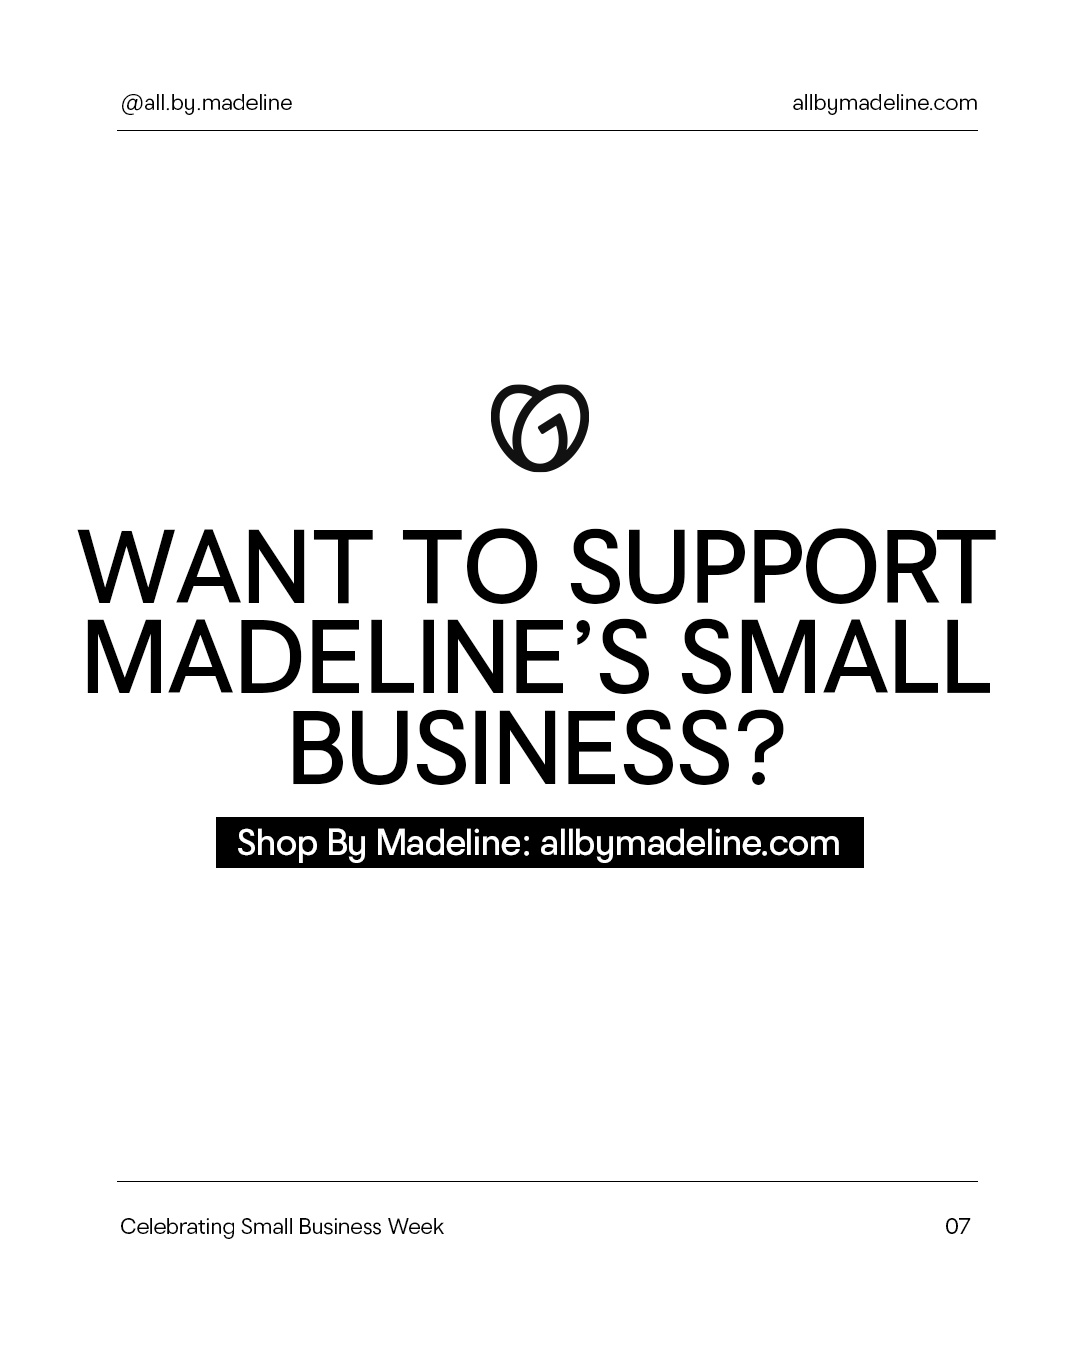 Want to support Madeline's small business?